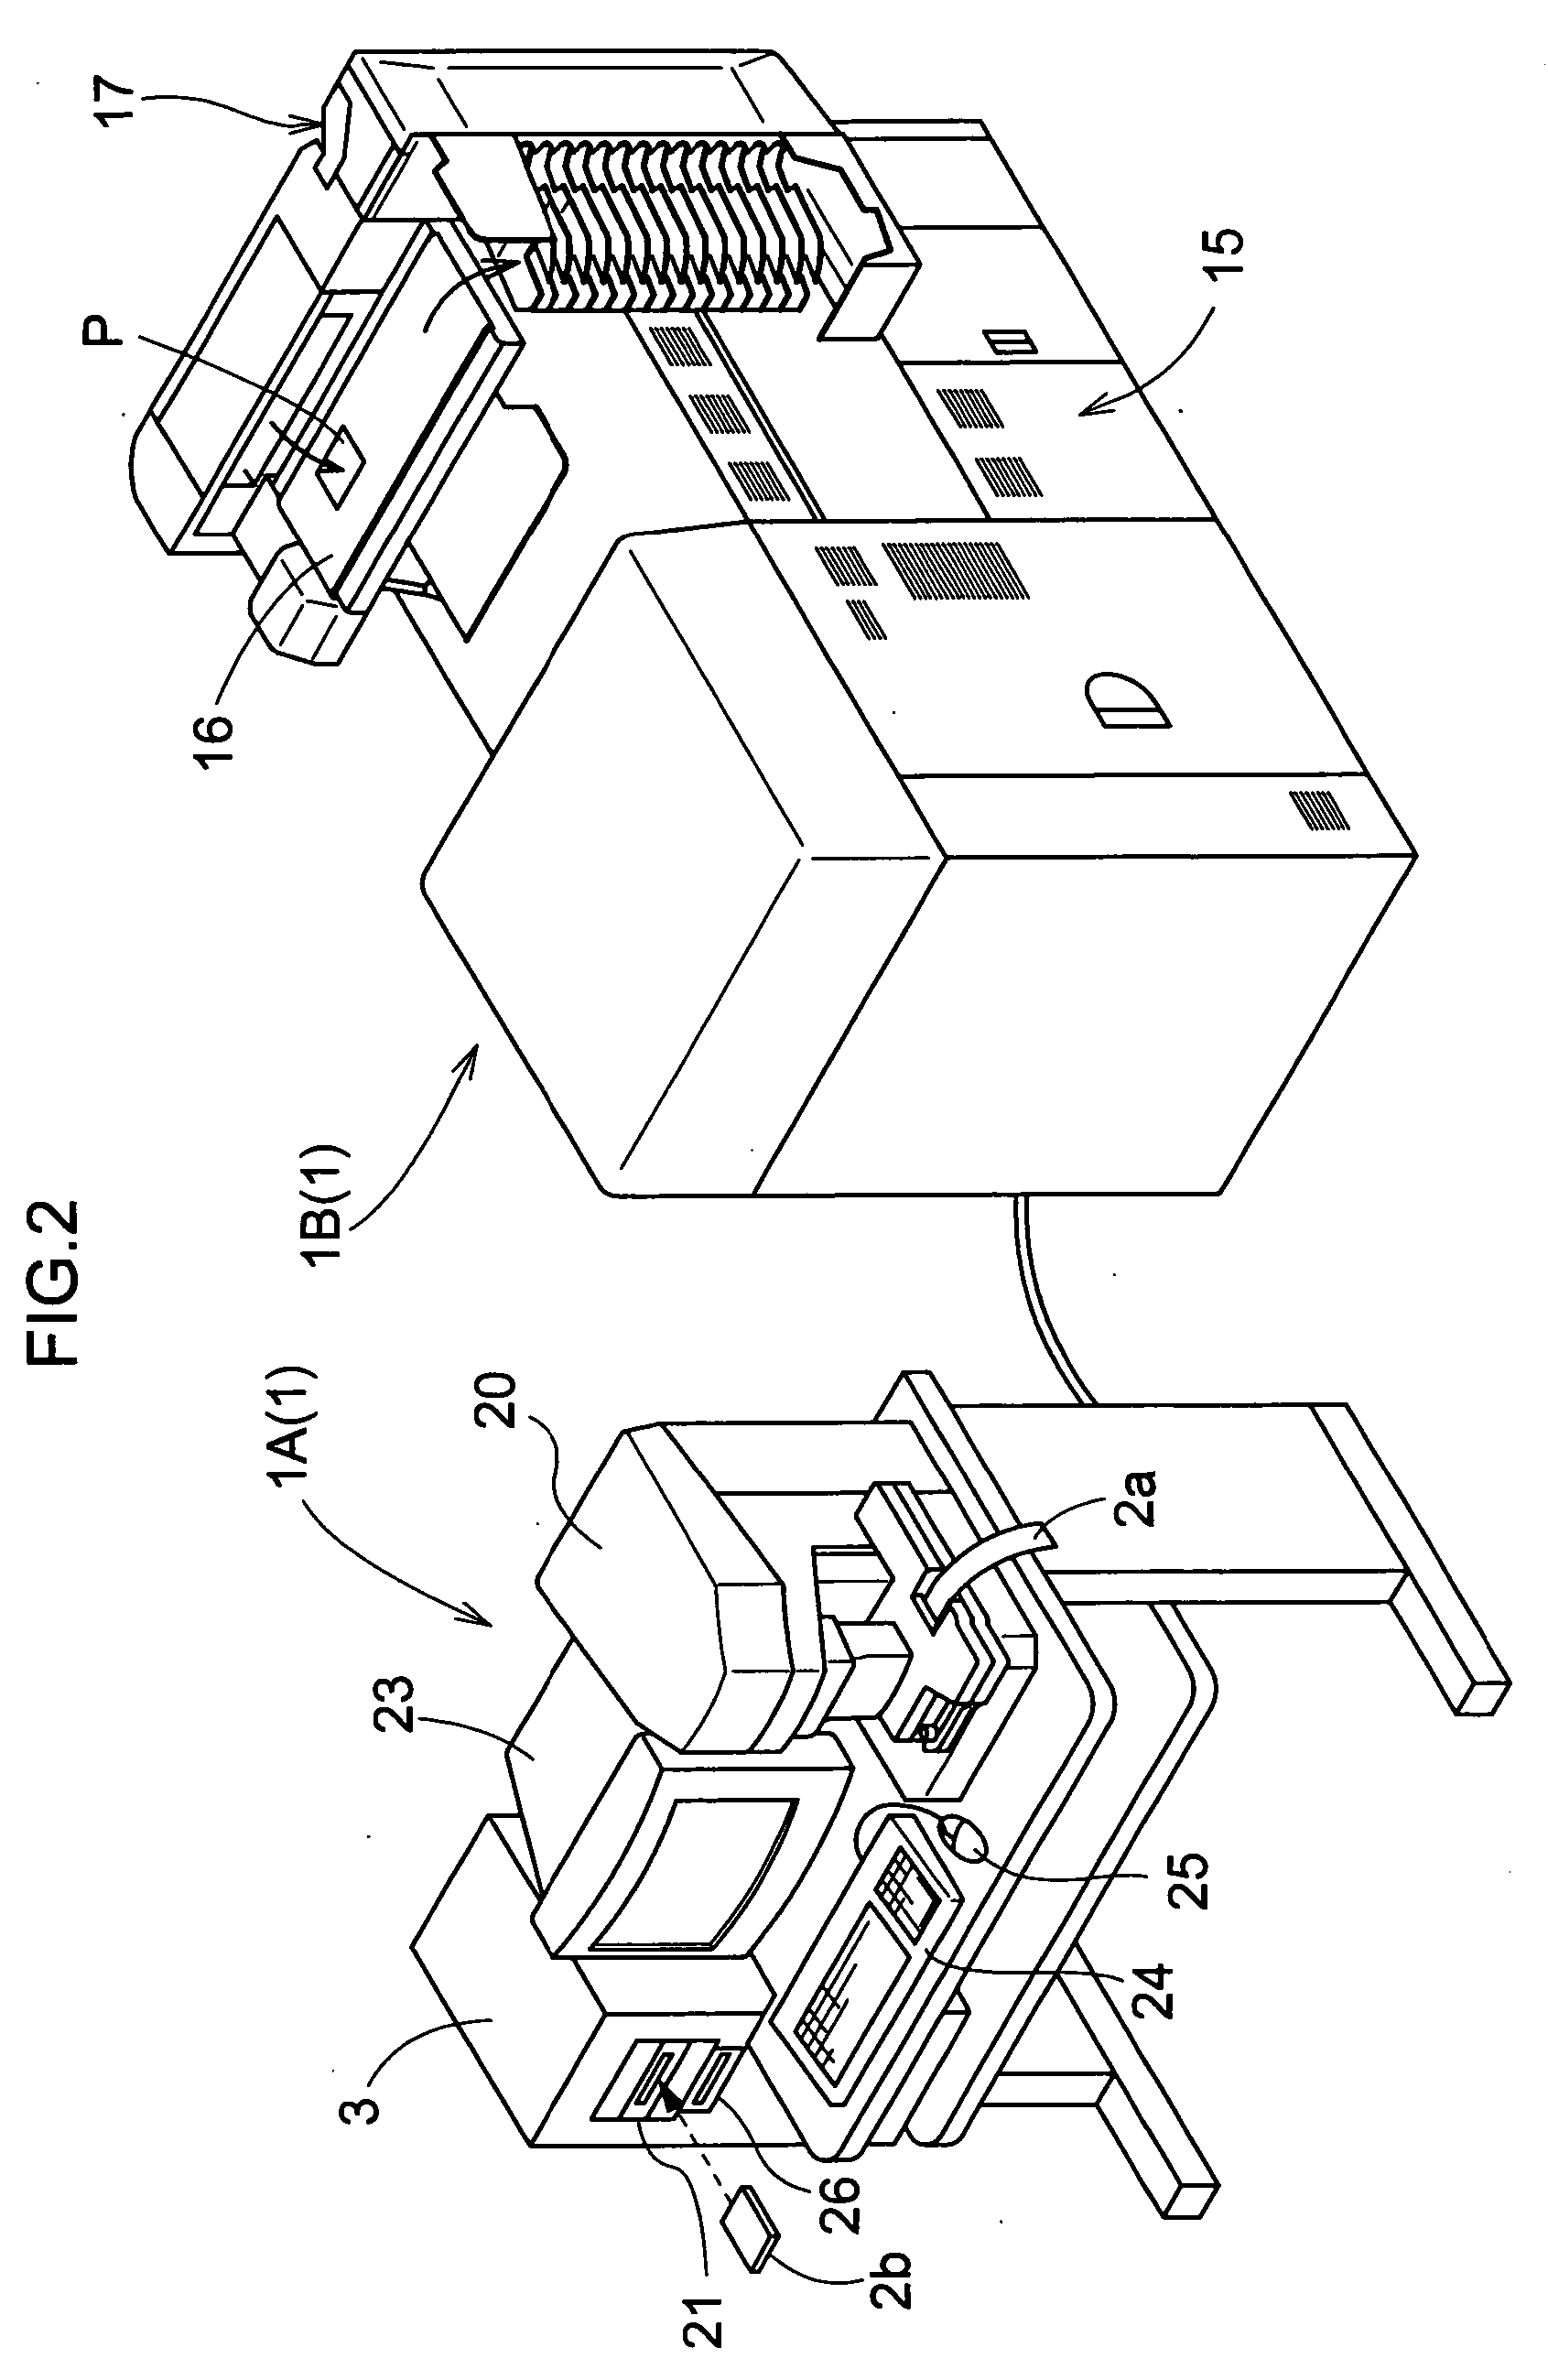 Apparatus and method for processing photographic image